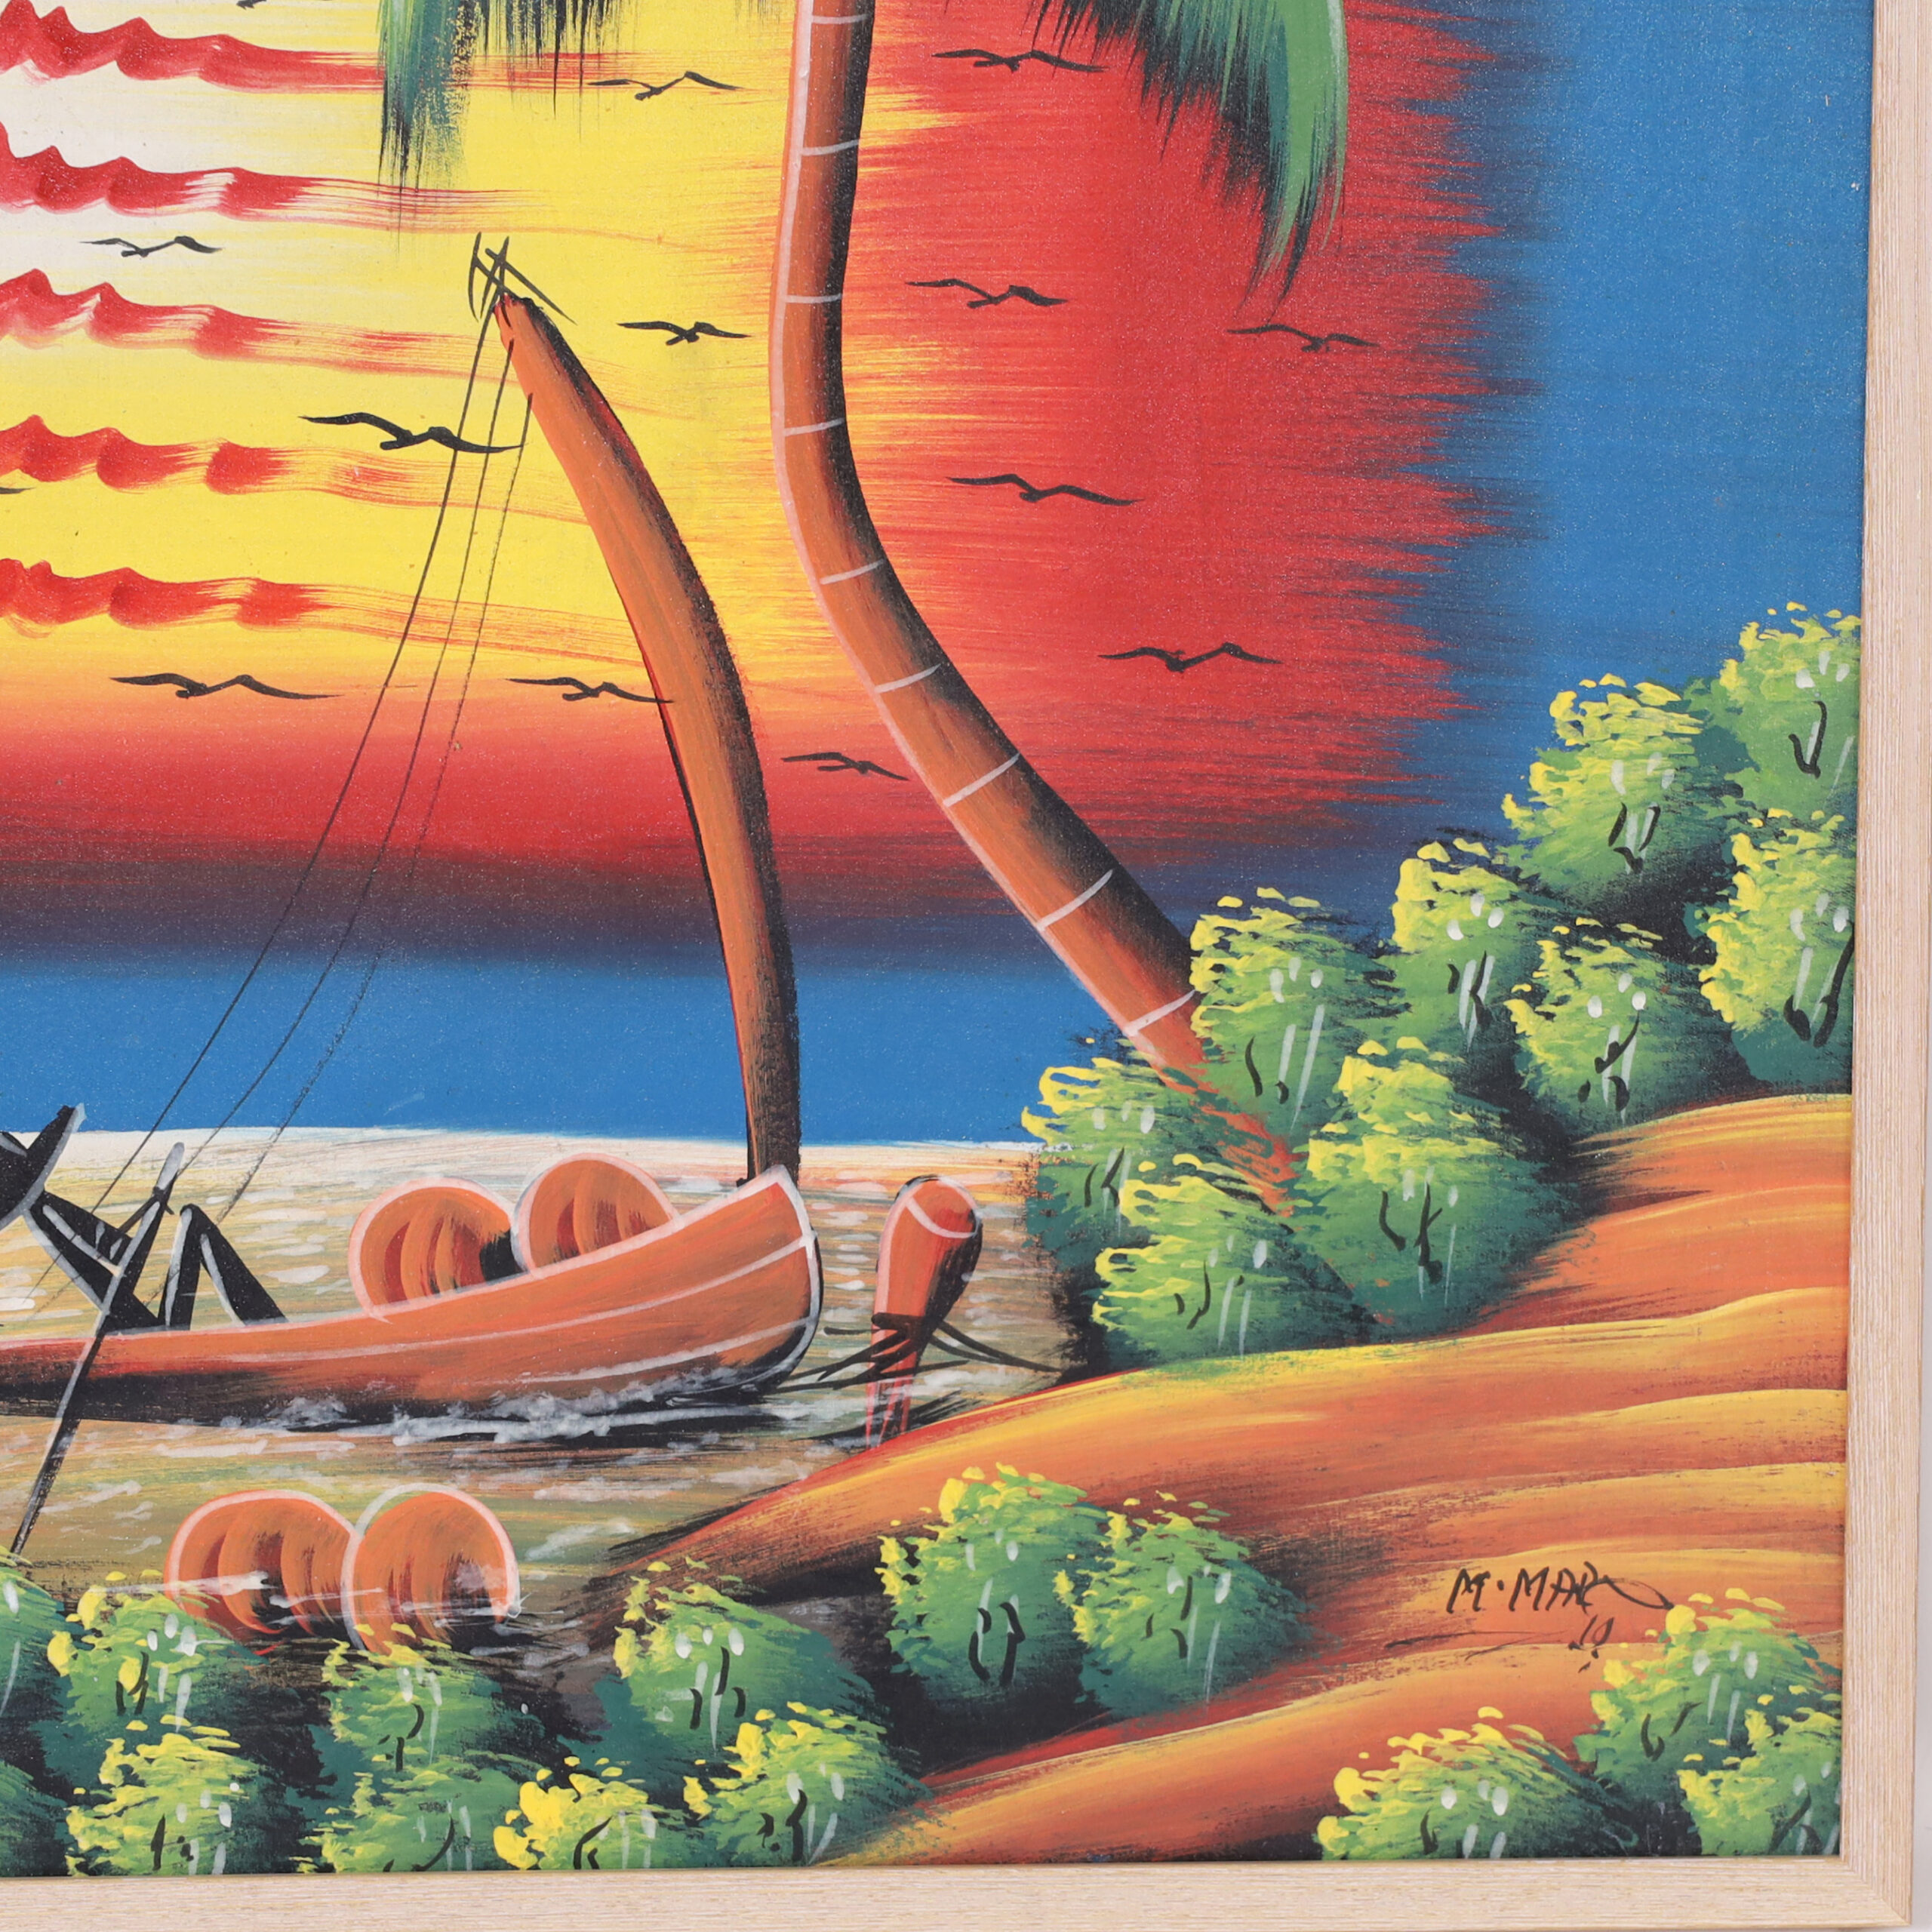 Vintage Haitian Painting Boats in Sunset by M. Mar